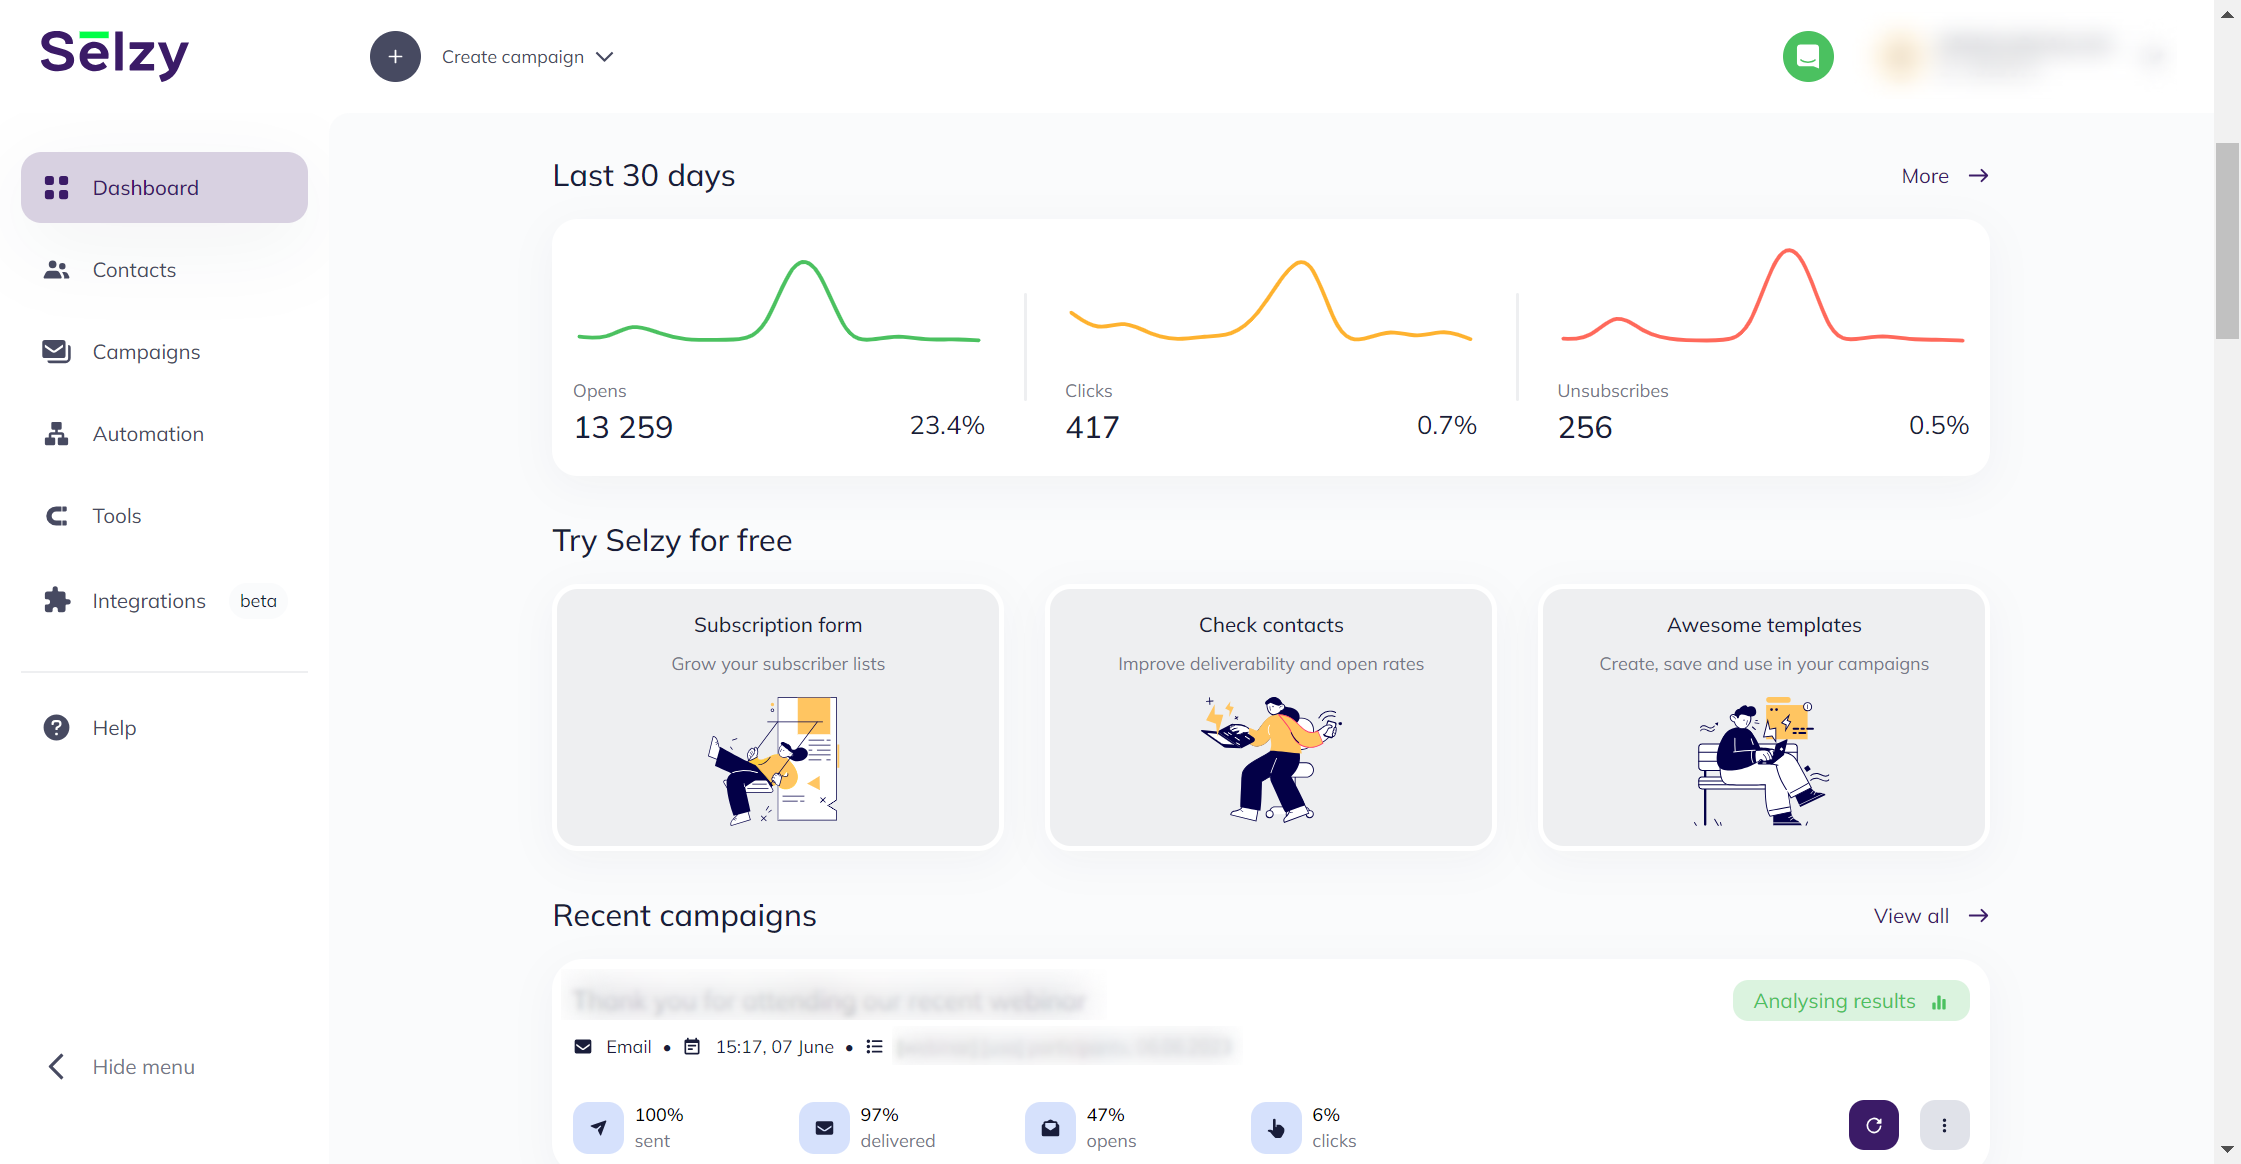 Selzy Software - Last 30-day stats and recent campaigns on the main dashboard.